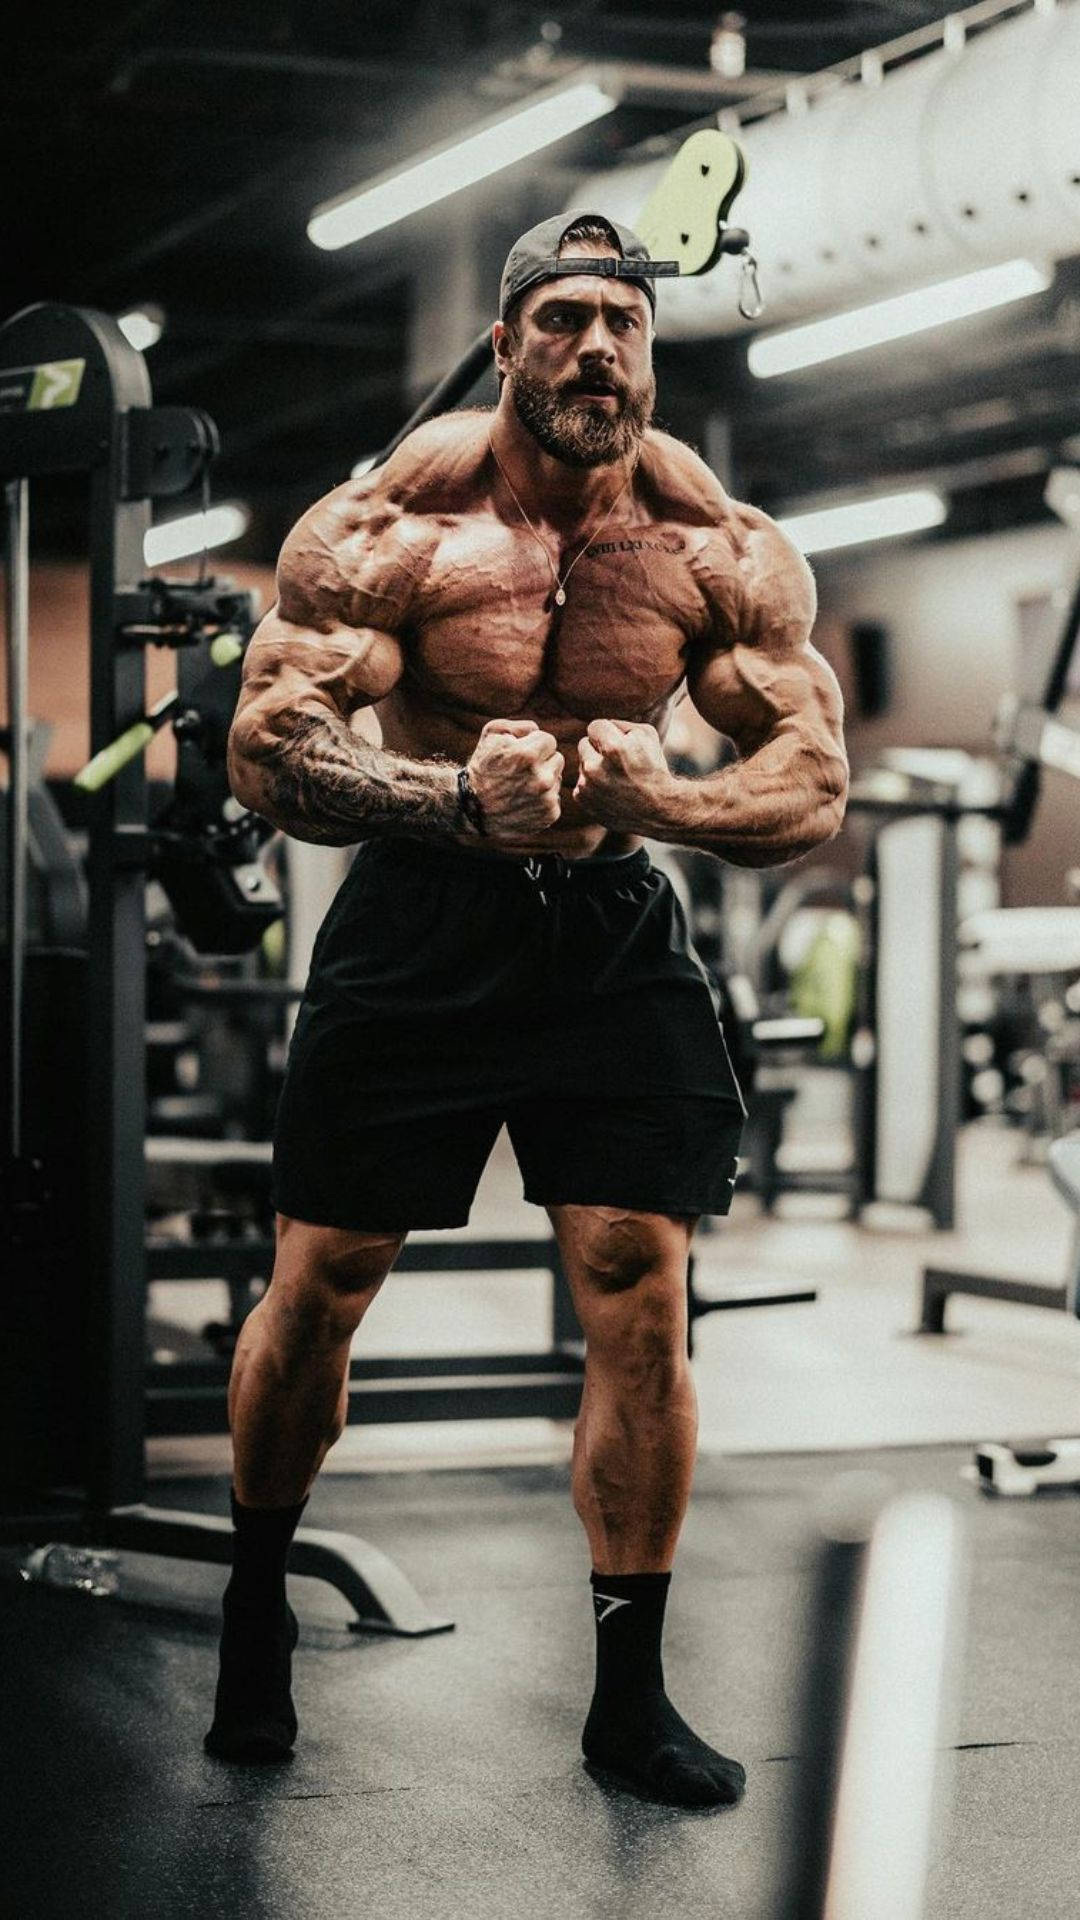 Chris Bumstead Most Muscular Pose Background